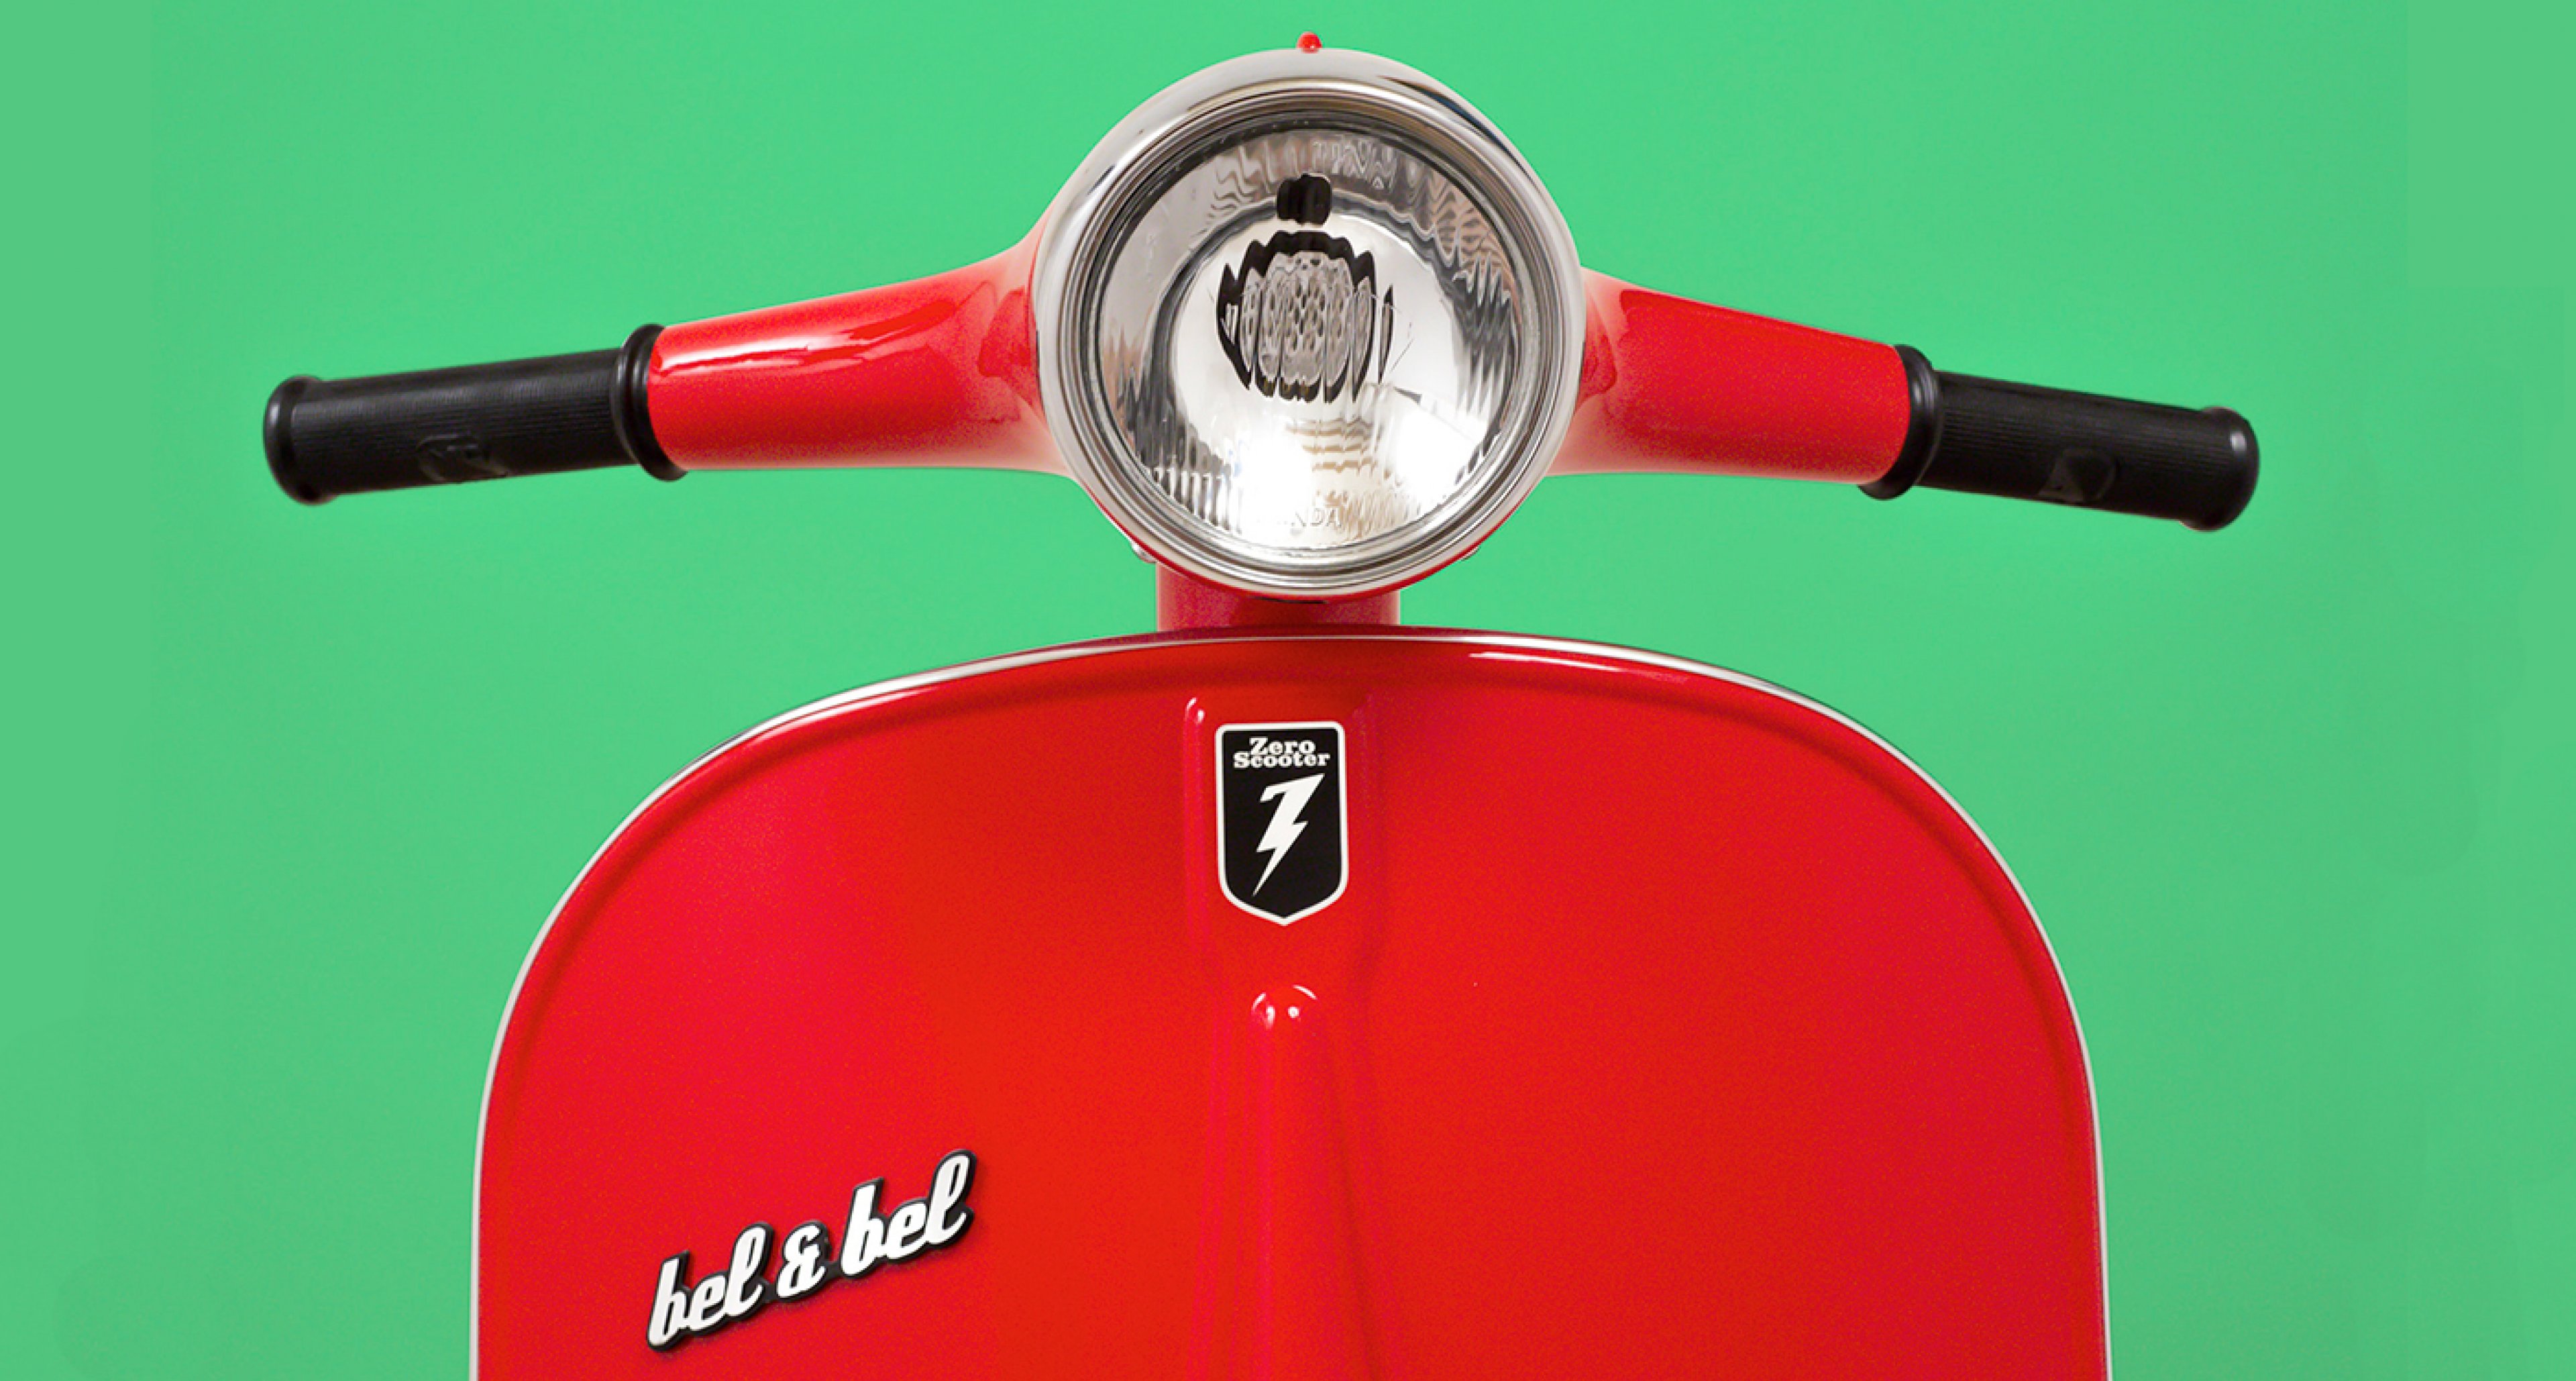 Download The Bel Bel Zero Scooter Perfects The Classic Optical Illusion Classic Driver Magazine